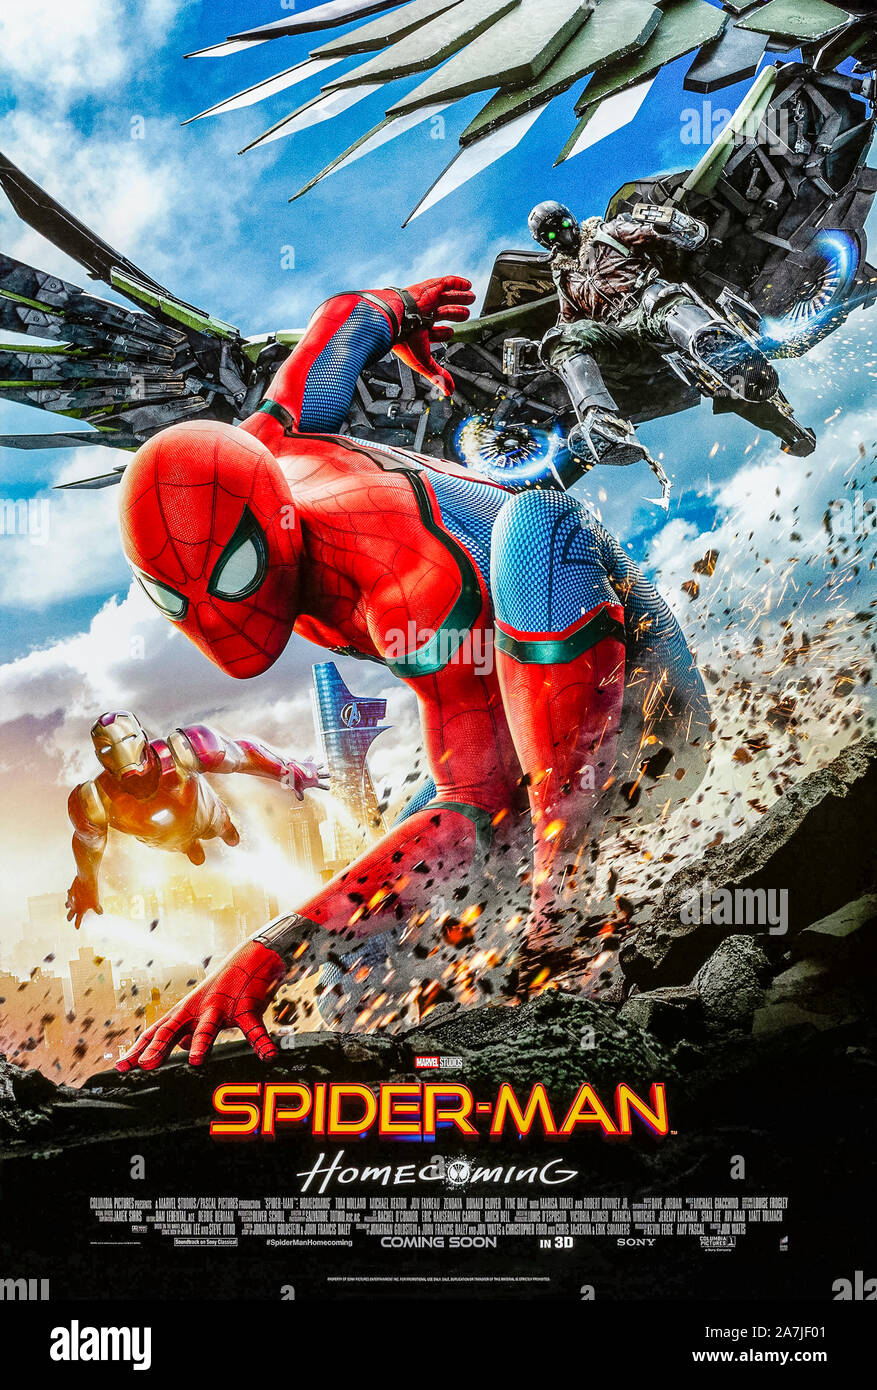 Spider-Man Homecoming (2017) directed by Jon Watts and starring Tom Holland, Michael Keaton and Robert Downey Jr. Peter Parker takes on the Vulture and his alien technology. Stock Photo